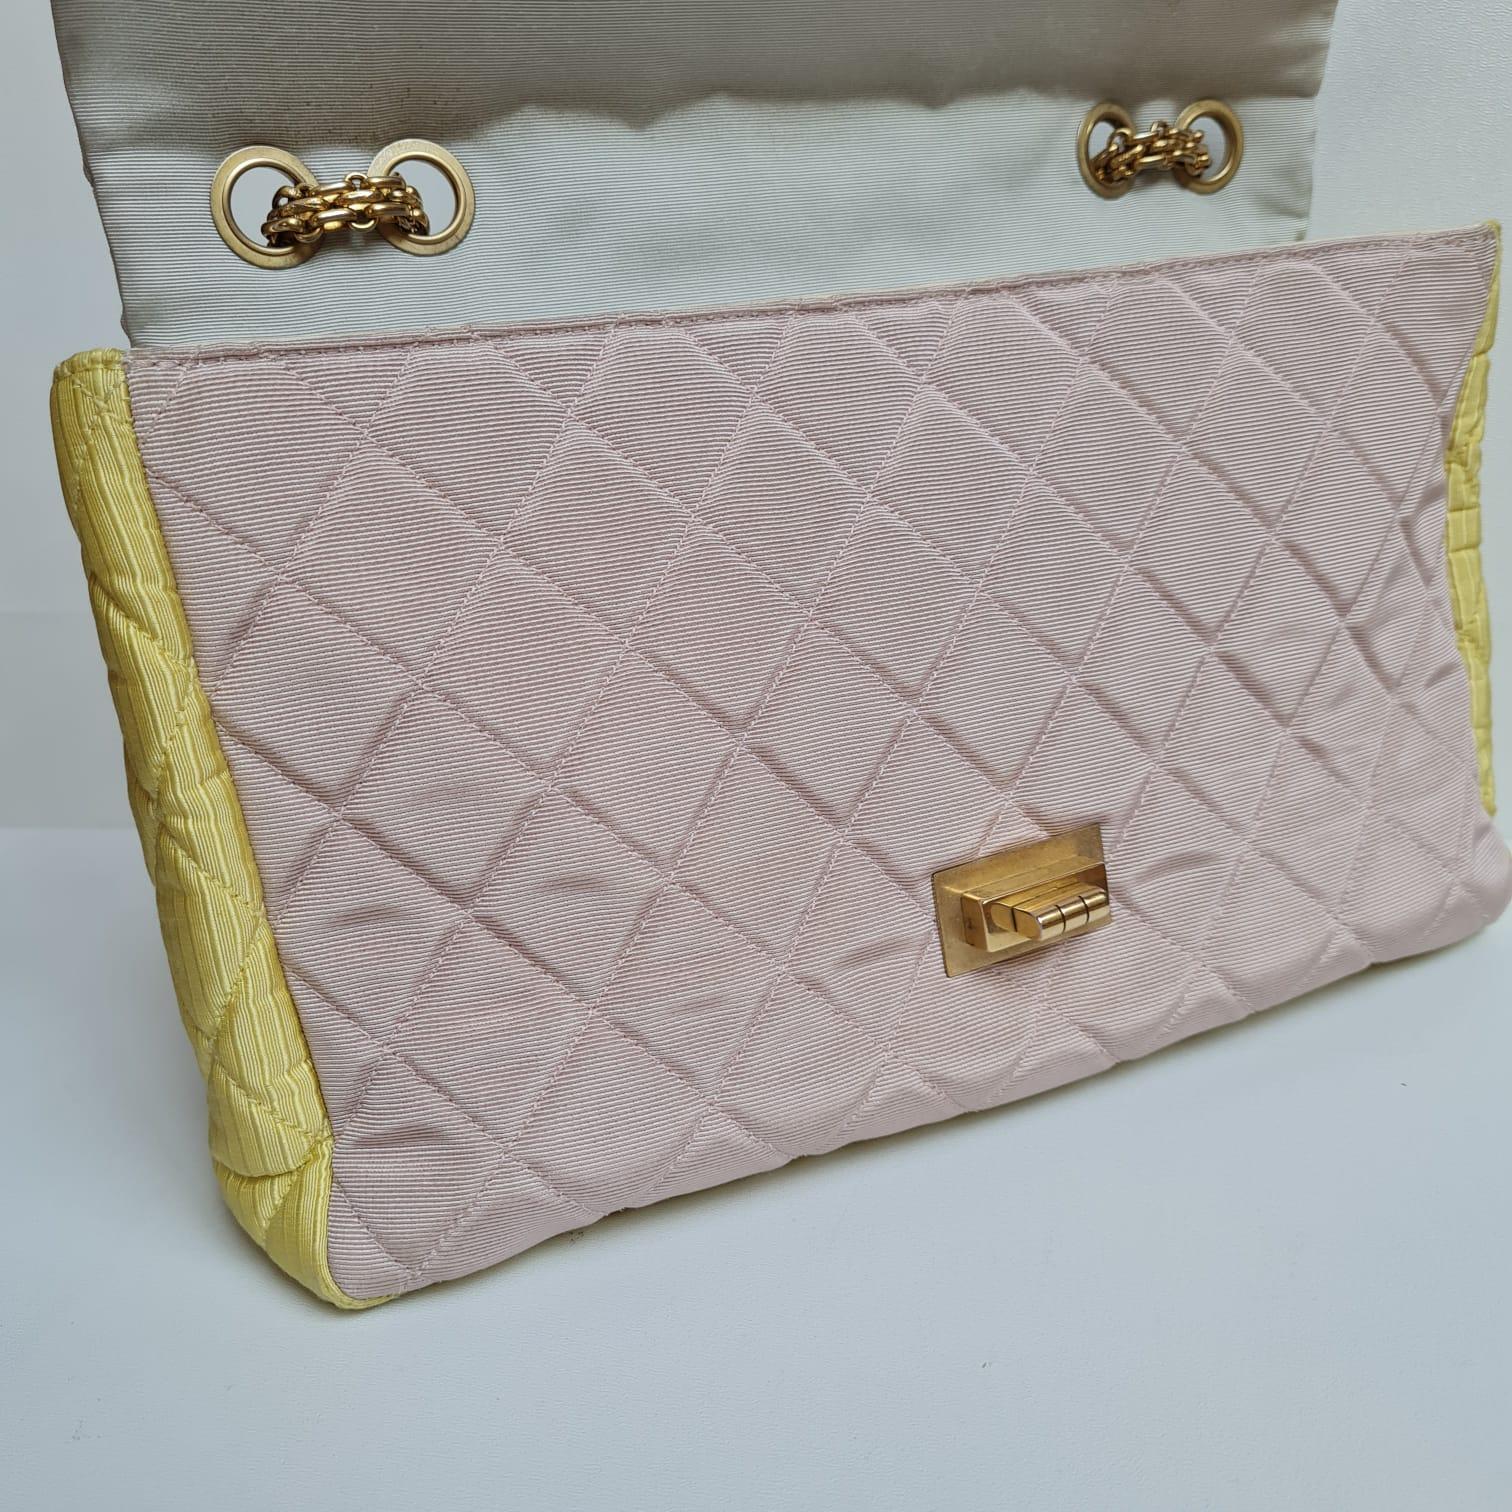 Chanel Pastel Tricolor 2.55 Canvas Quilted 227 Reissue Flap Bag For Sale 10